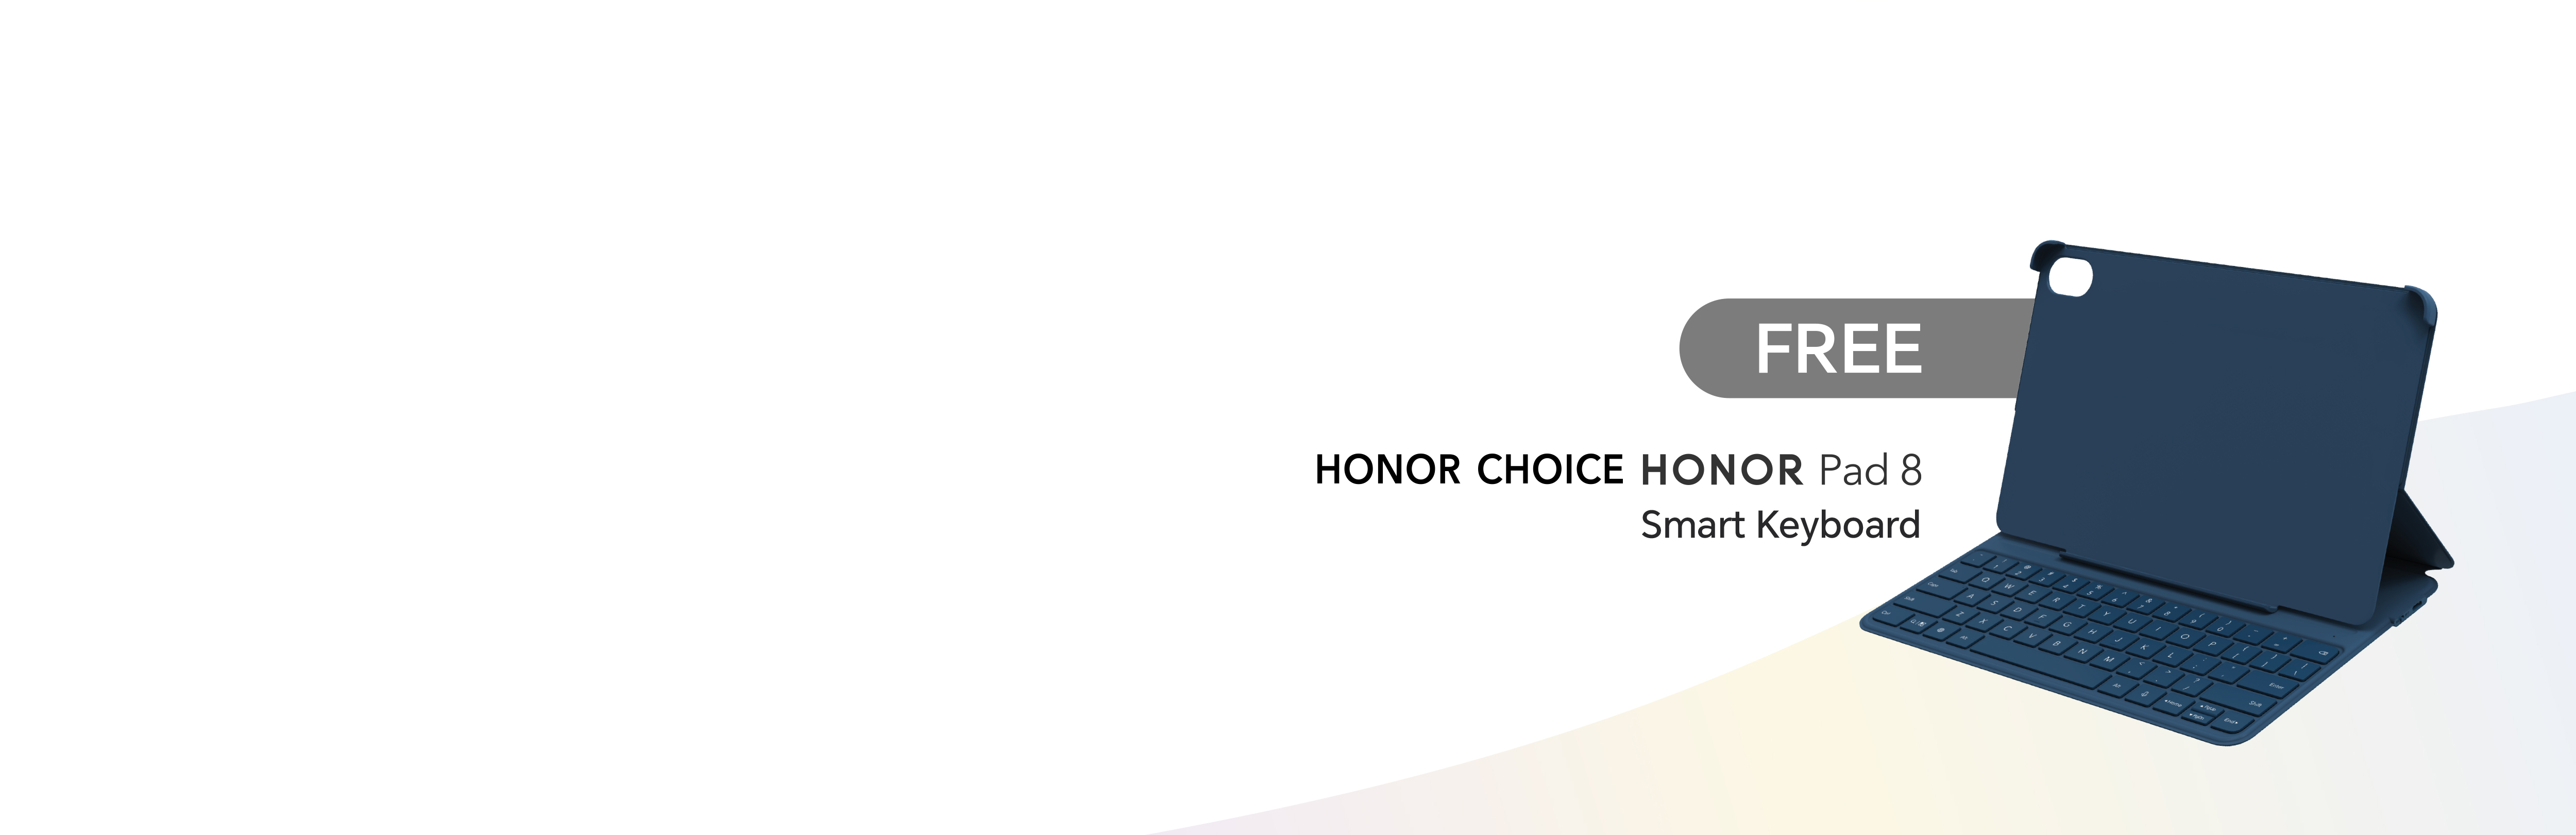 Almost a year-old Honor Pad 8 now comes with 256GB storage